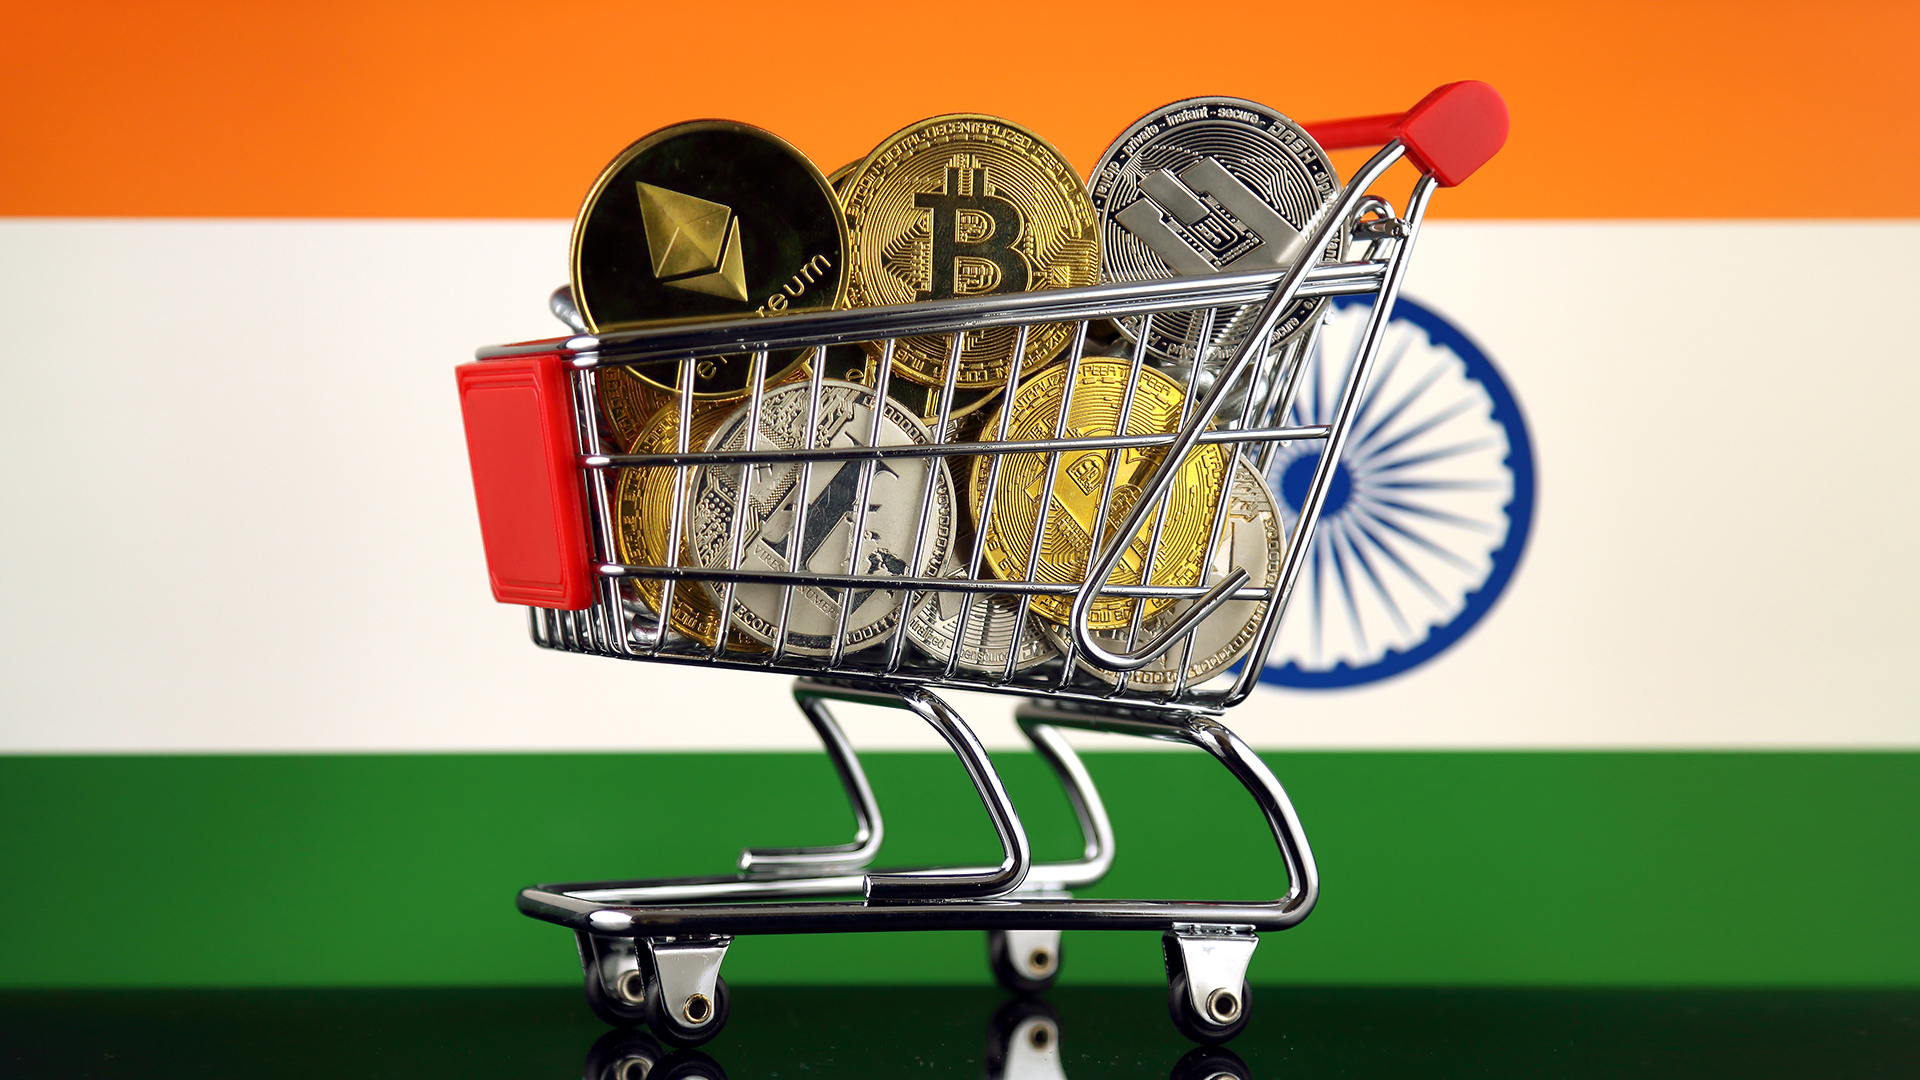 How to buy cryptocurrencies in India?